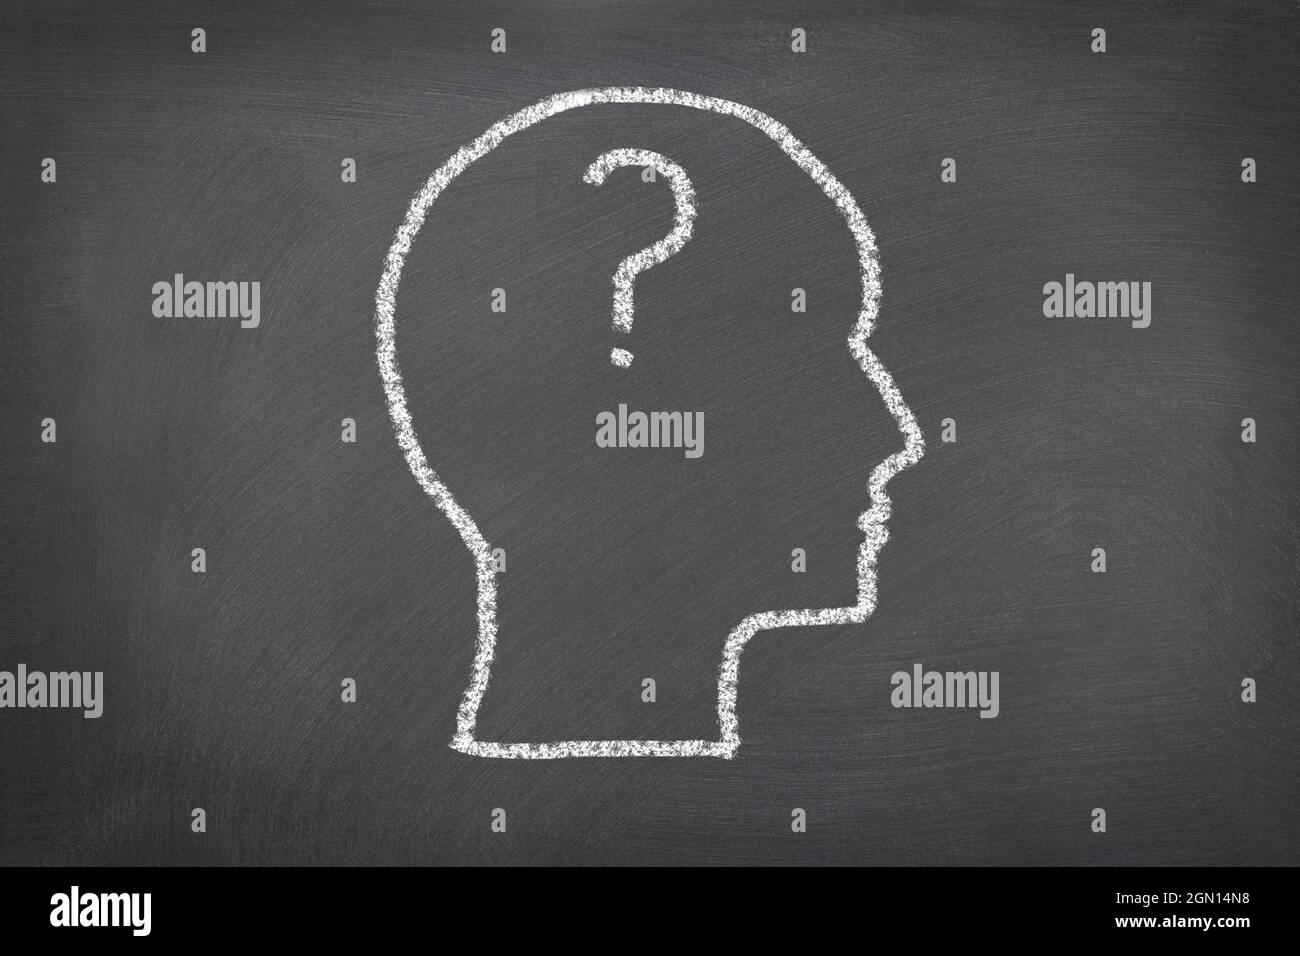 A chalk sketch on a blackboard of a human head and question mark that represents thoughts and ideas, problems, and confusion.  For use as any science Stock Photo